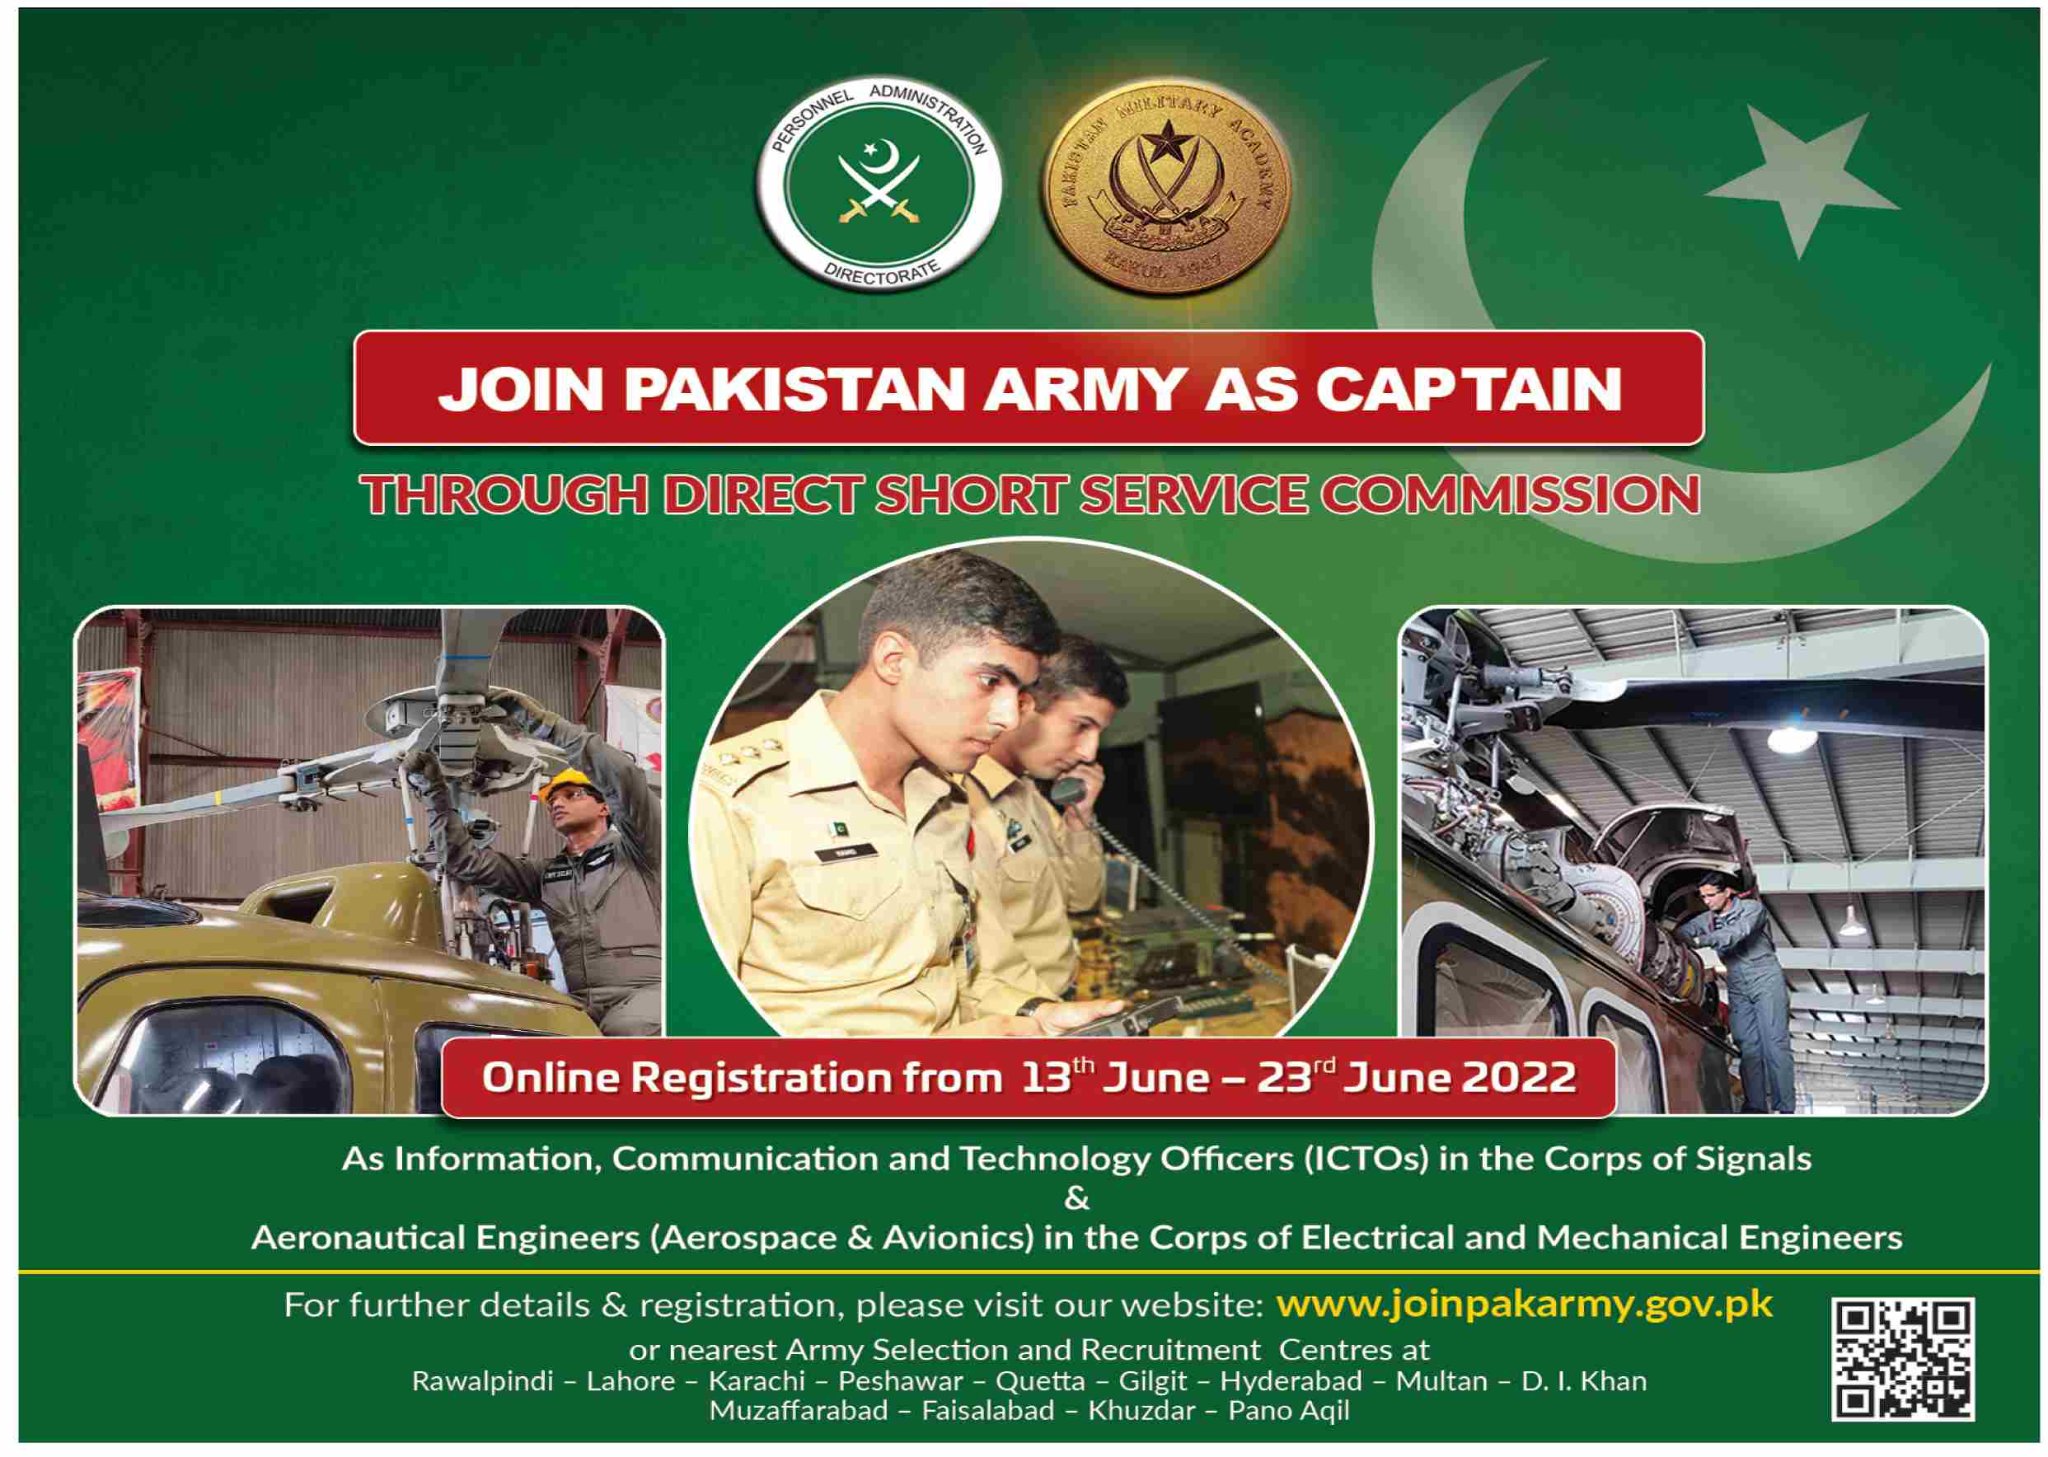 Join Pak Army as Captain 2022 Short Service Commission Course Online Registration joinpakarmy.gov.pk